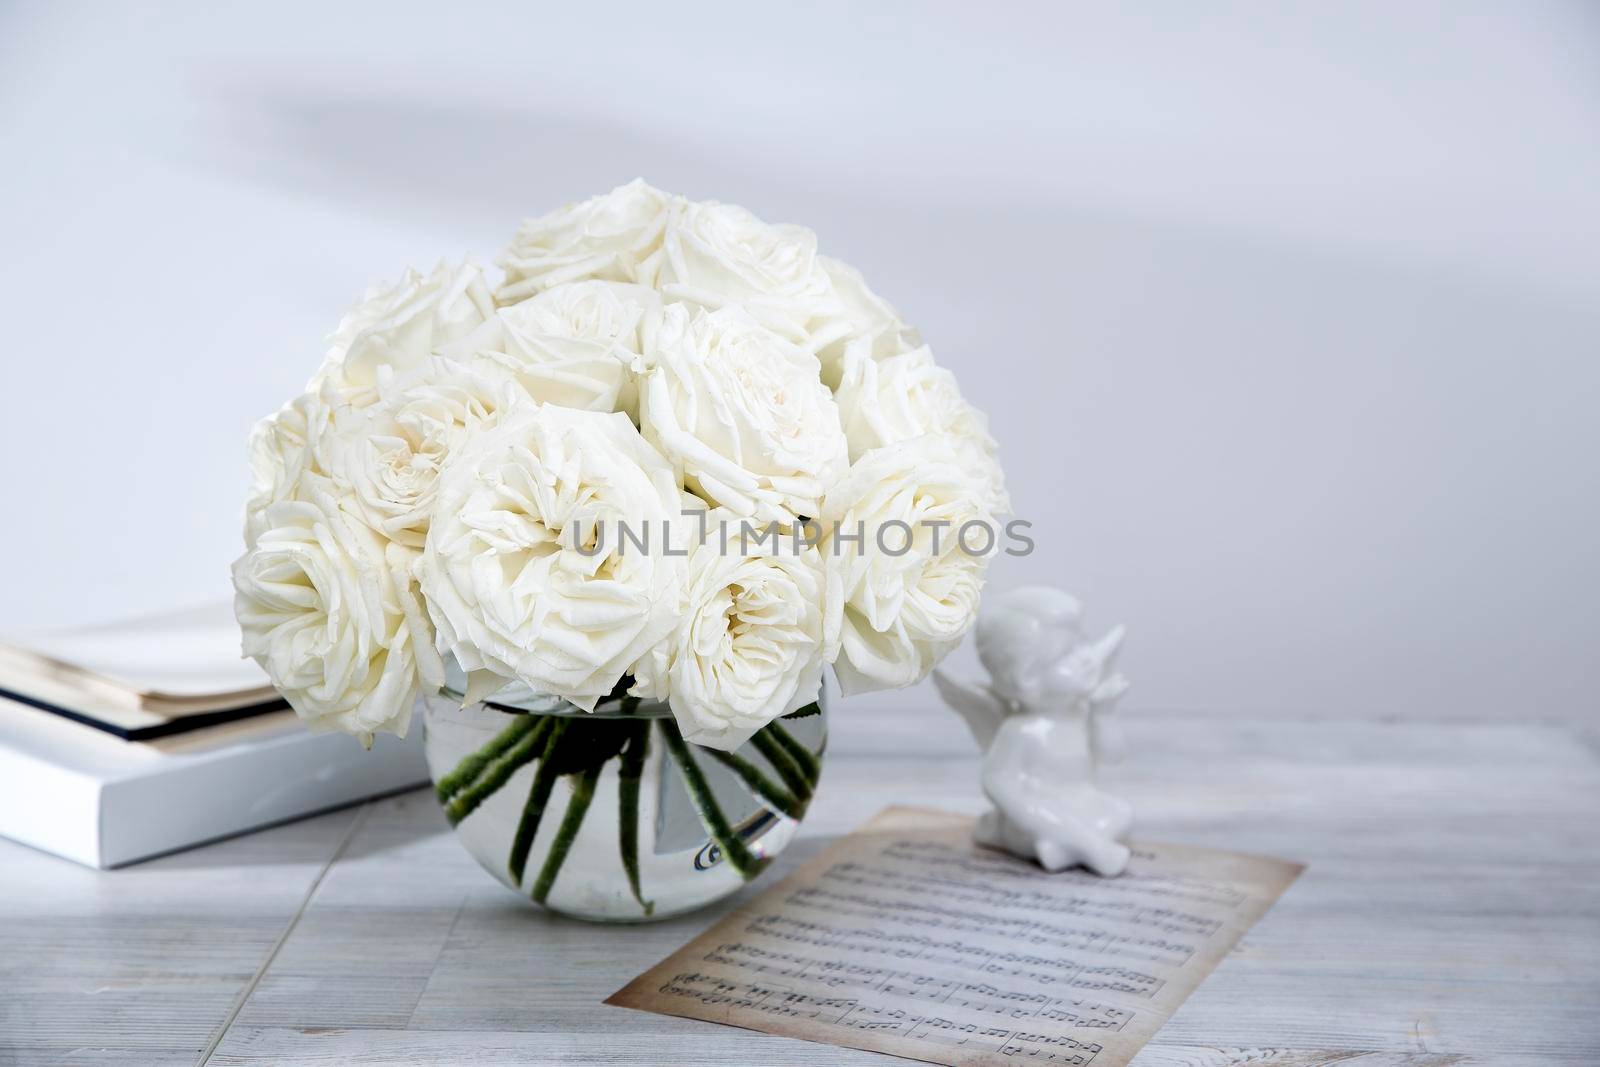 London, UK -20 March 2021, A bouquet of white roses in a round glass vase on a table with a cup of tea and a book. Copy space. Figurine of pears